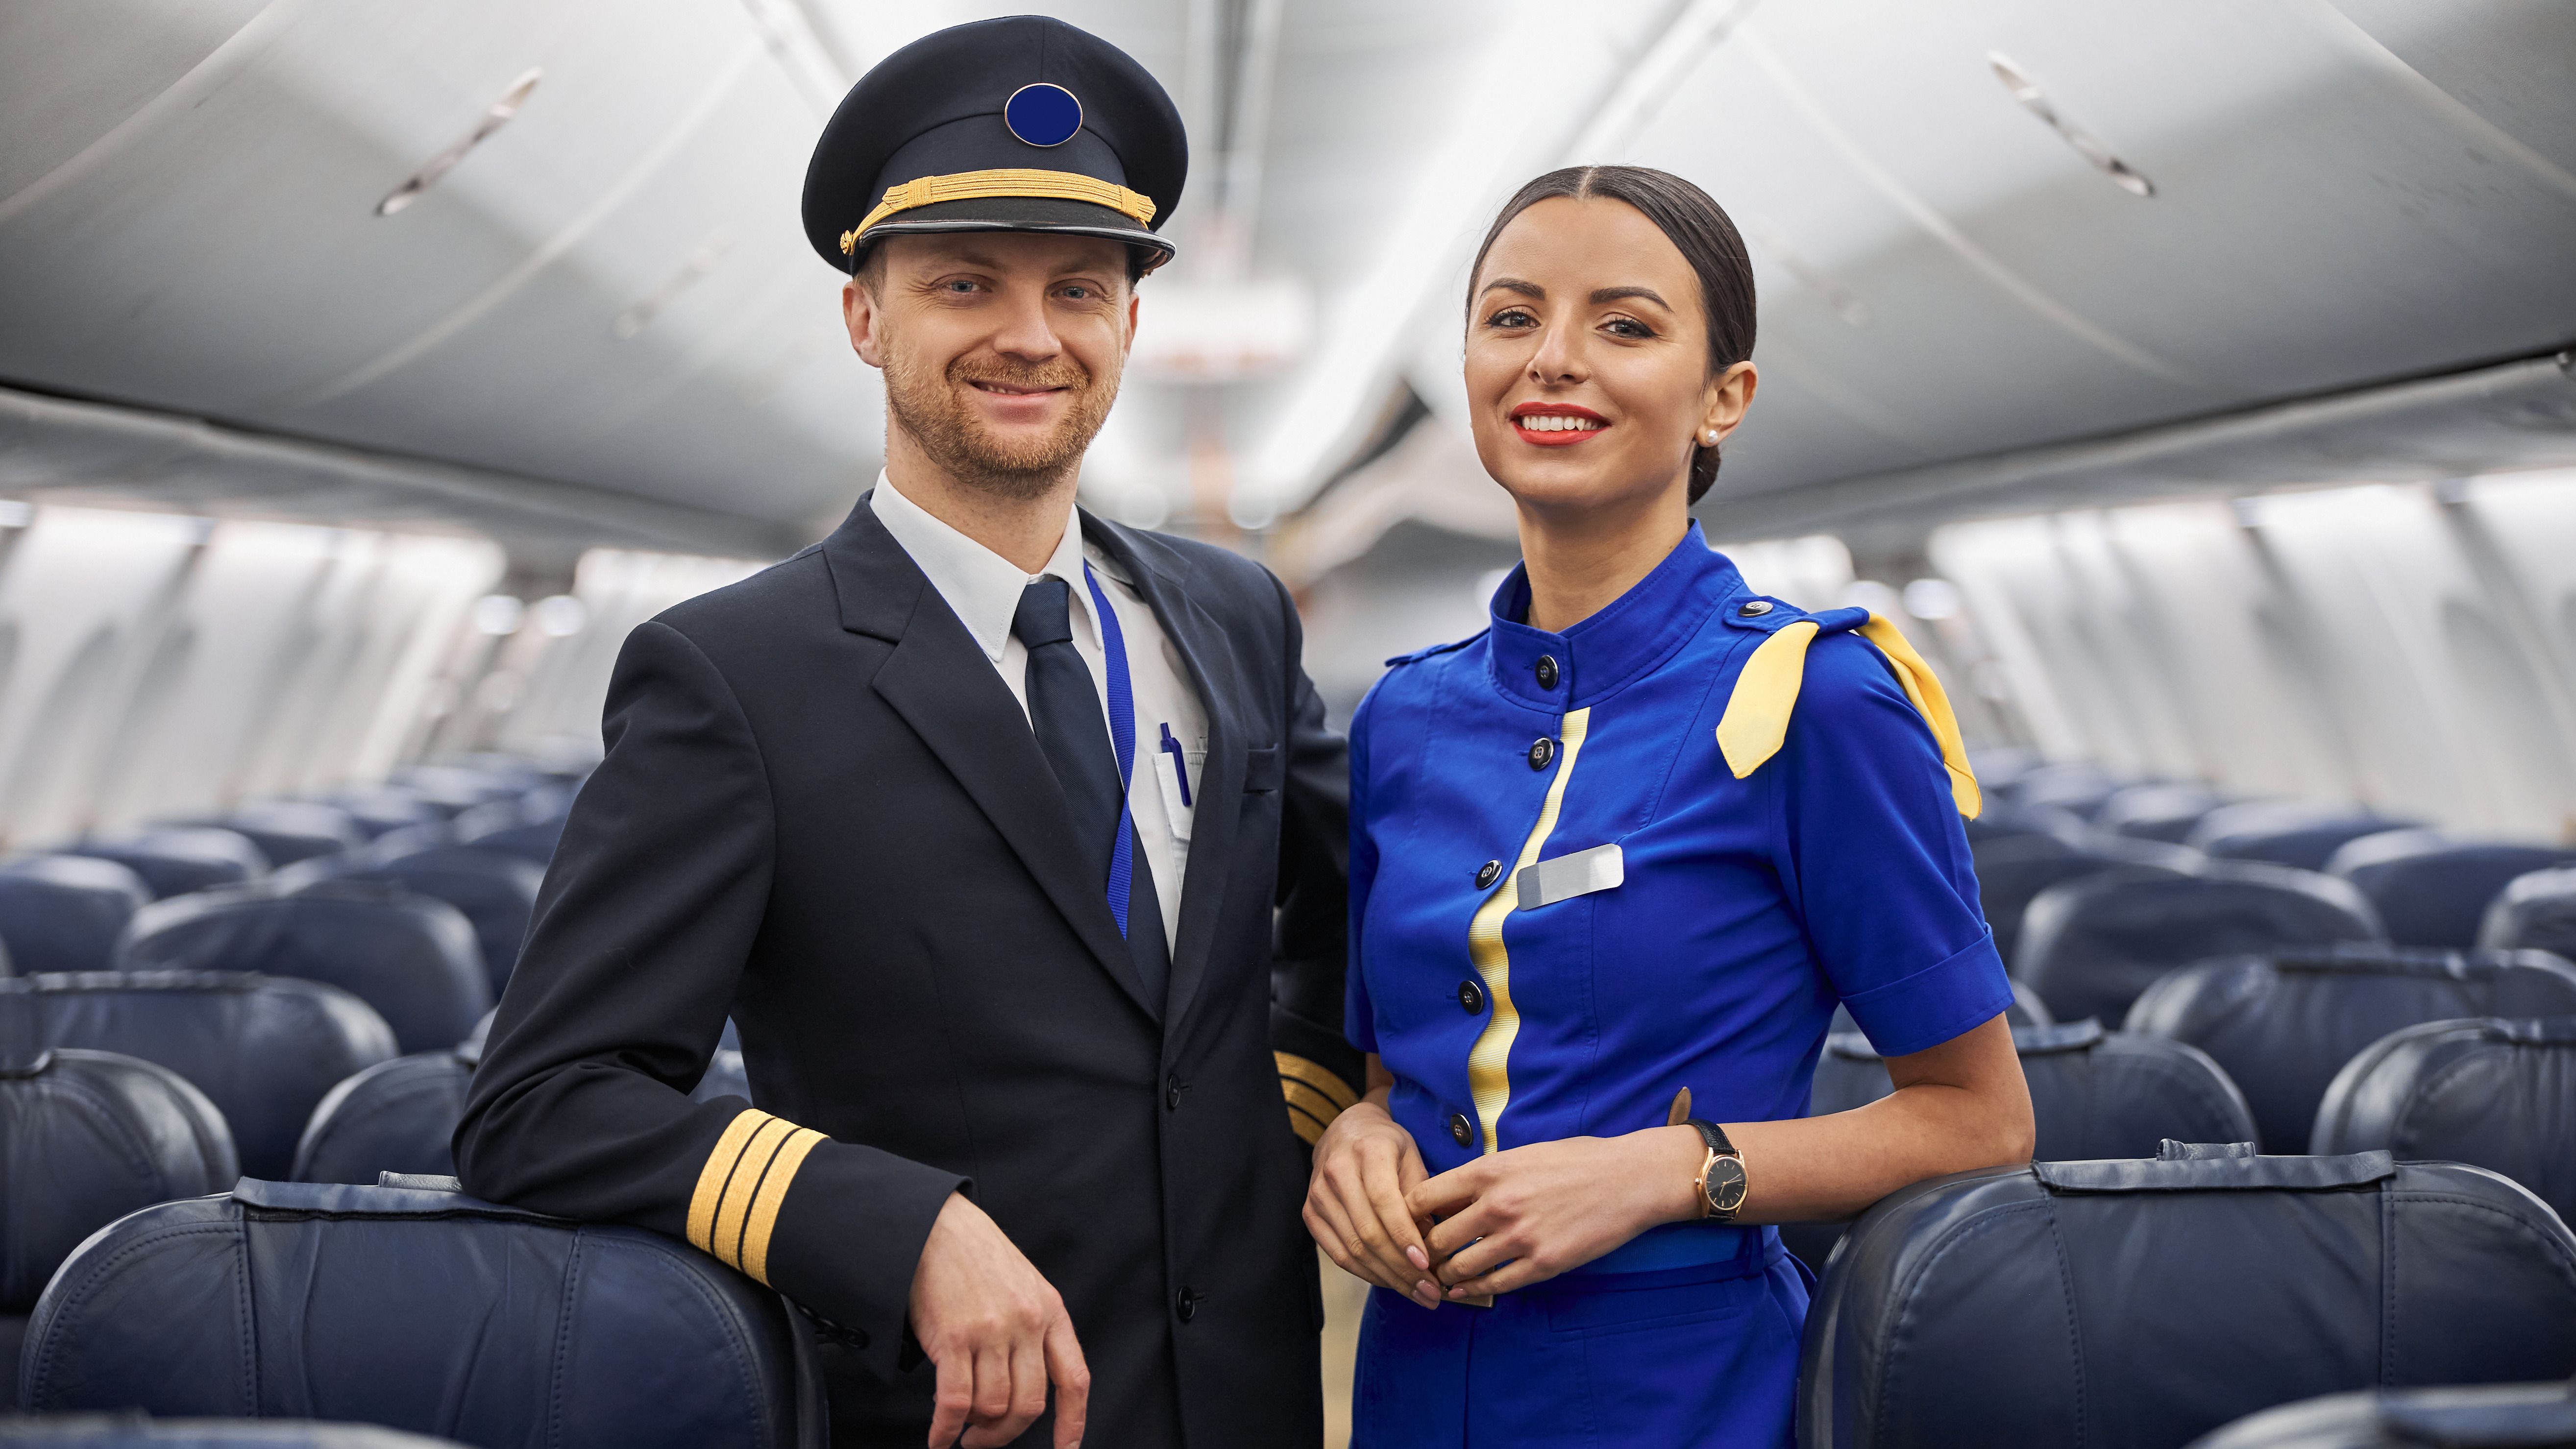 Portrait of a pilot and a cabin crew member inside a plane 